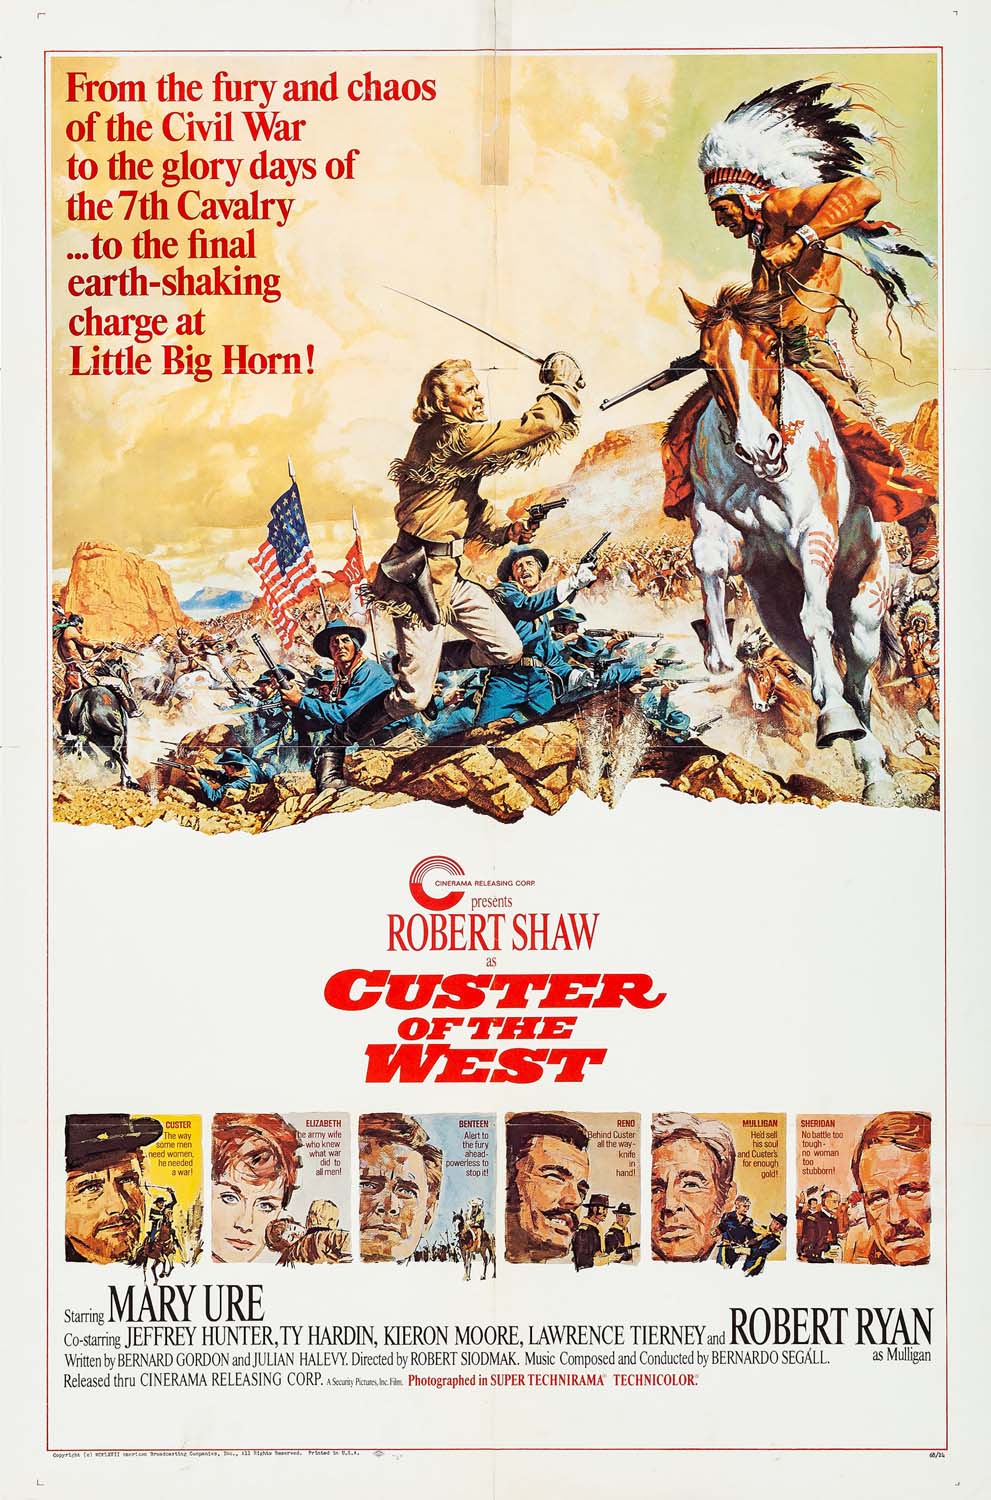 CUSTER OF THE WEST